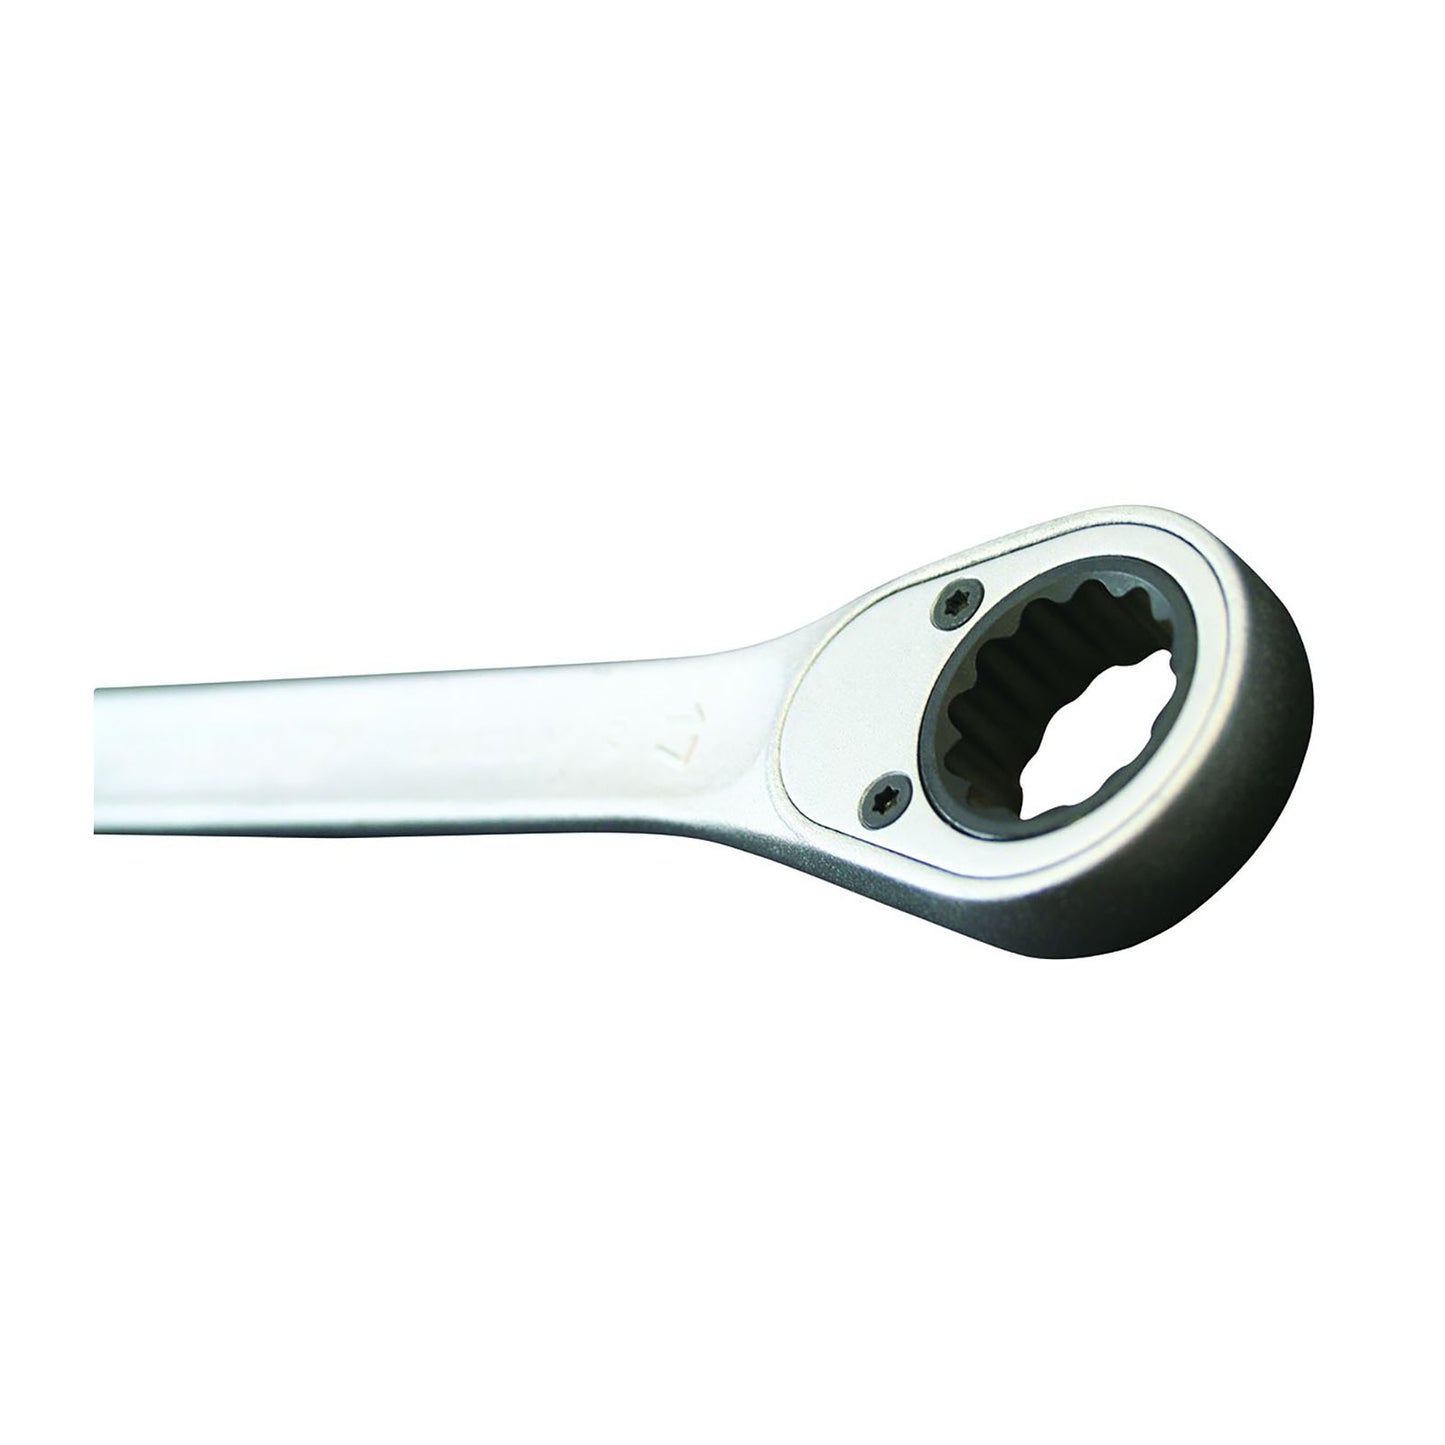 GEDORE 7 R 11 - Ratchet combination wrench, 11mm (2297094)